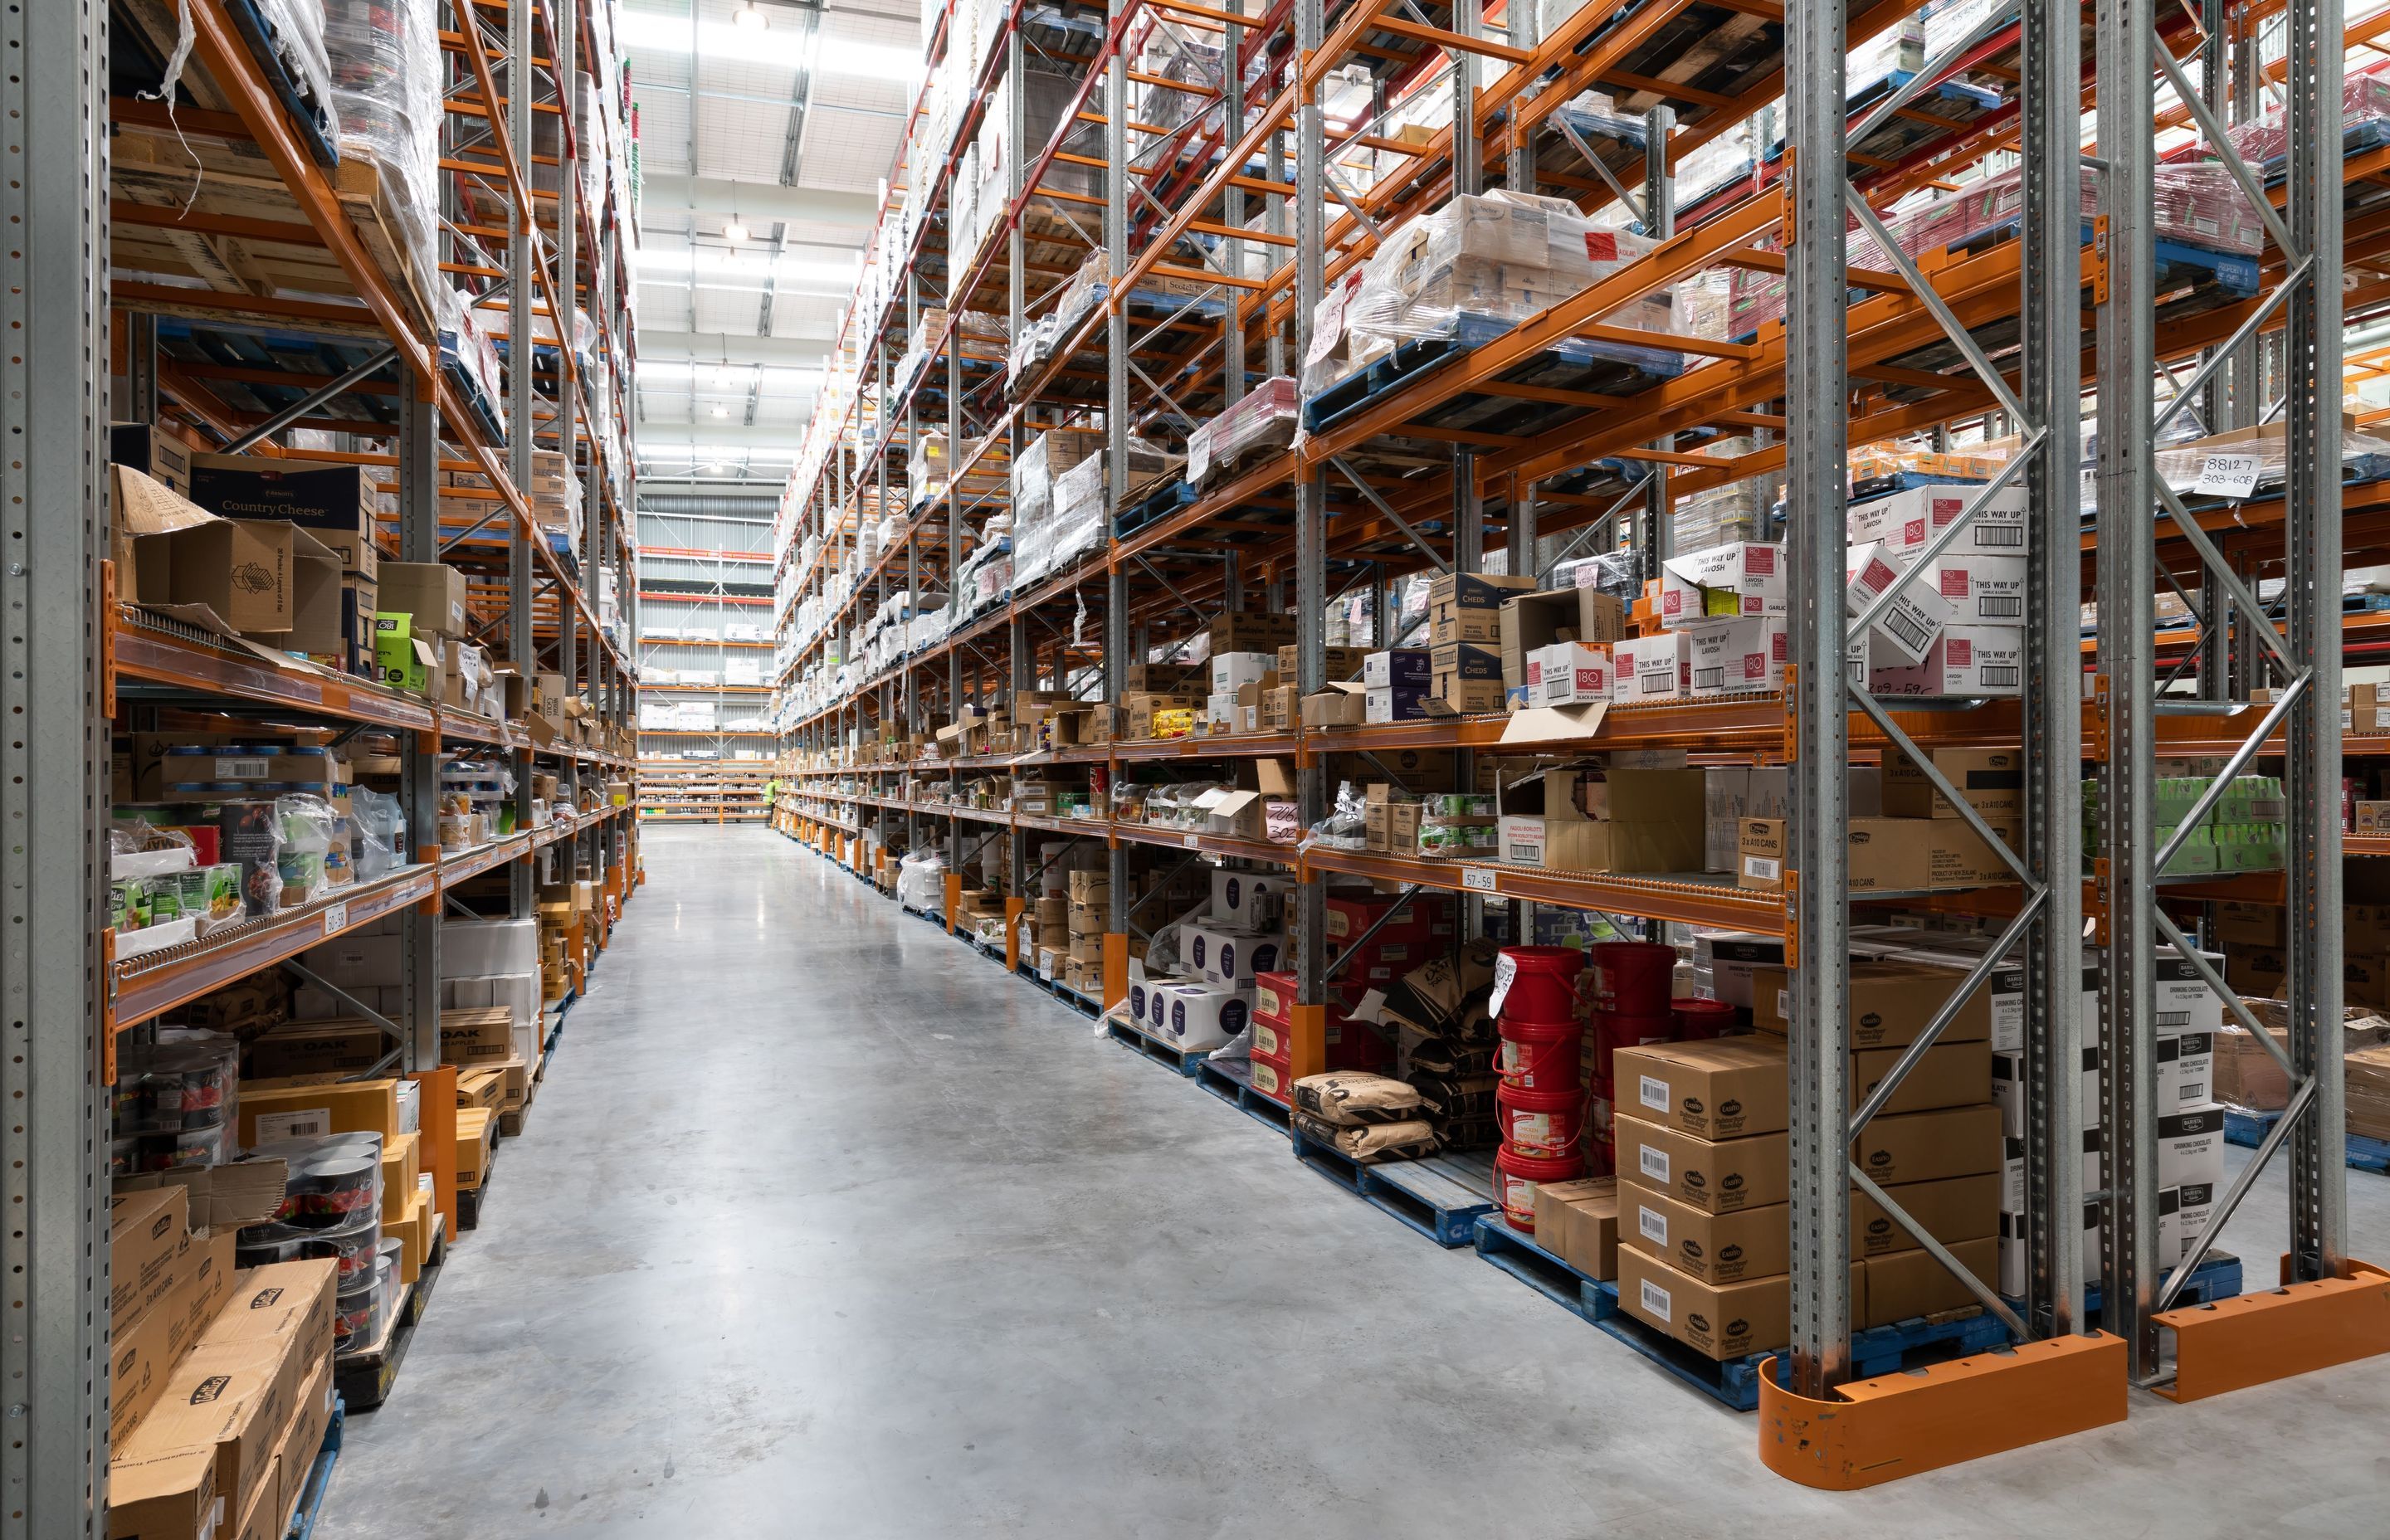 Construction of temperature-controlled warehouses are typically much more complex than standard facilities.